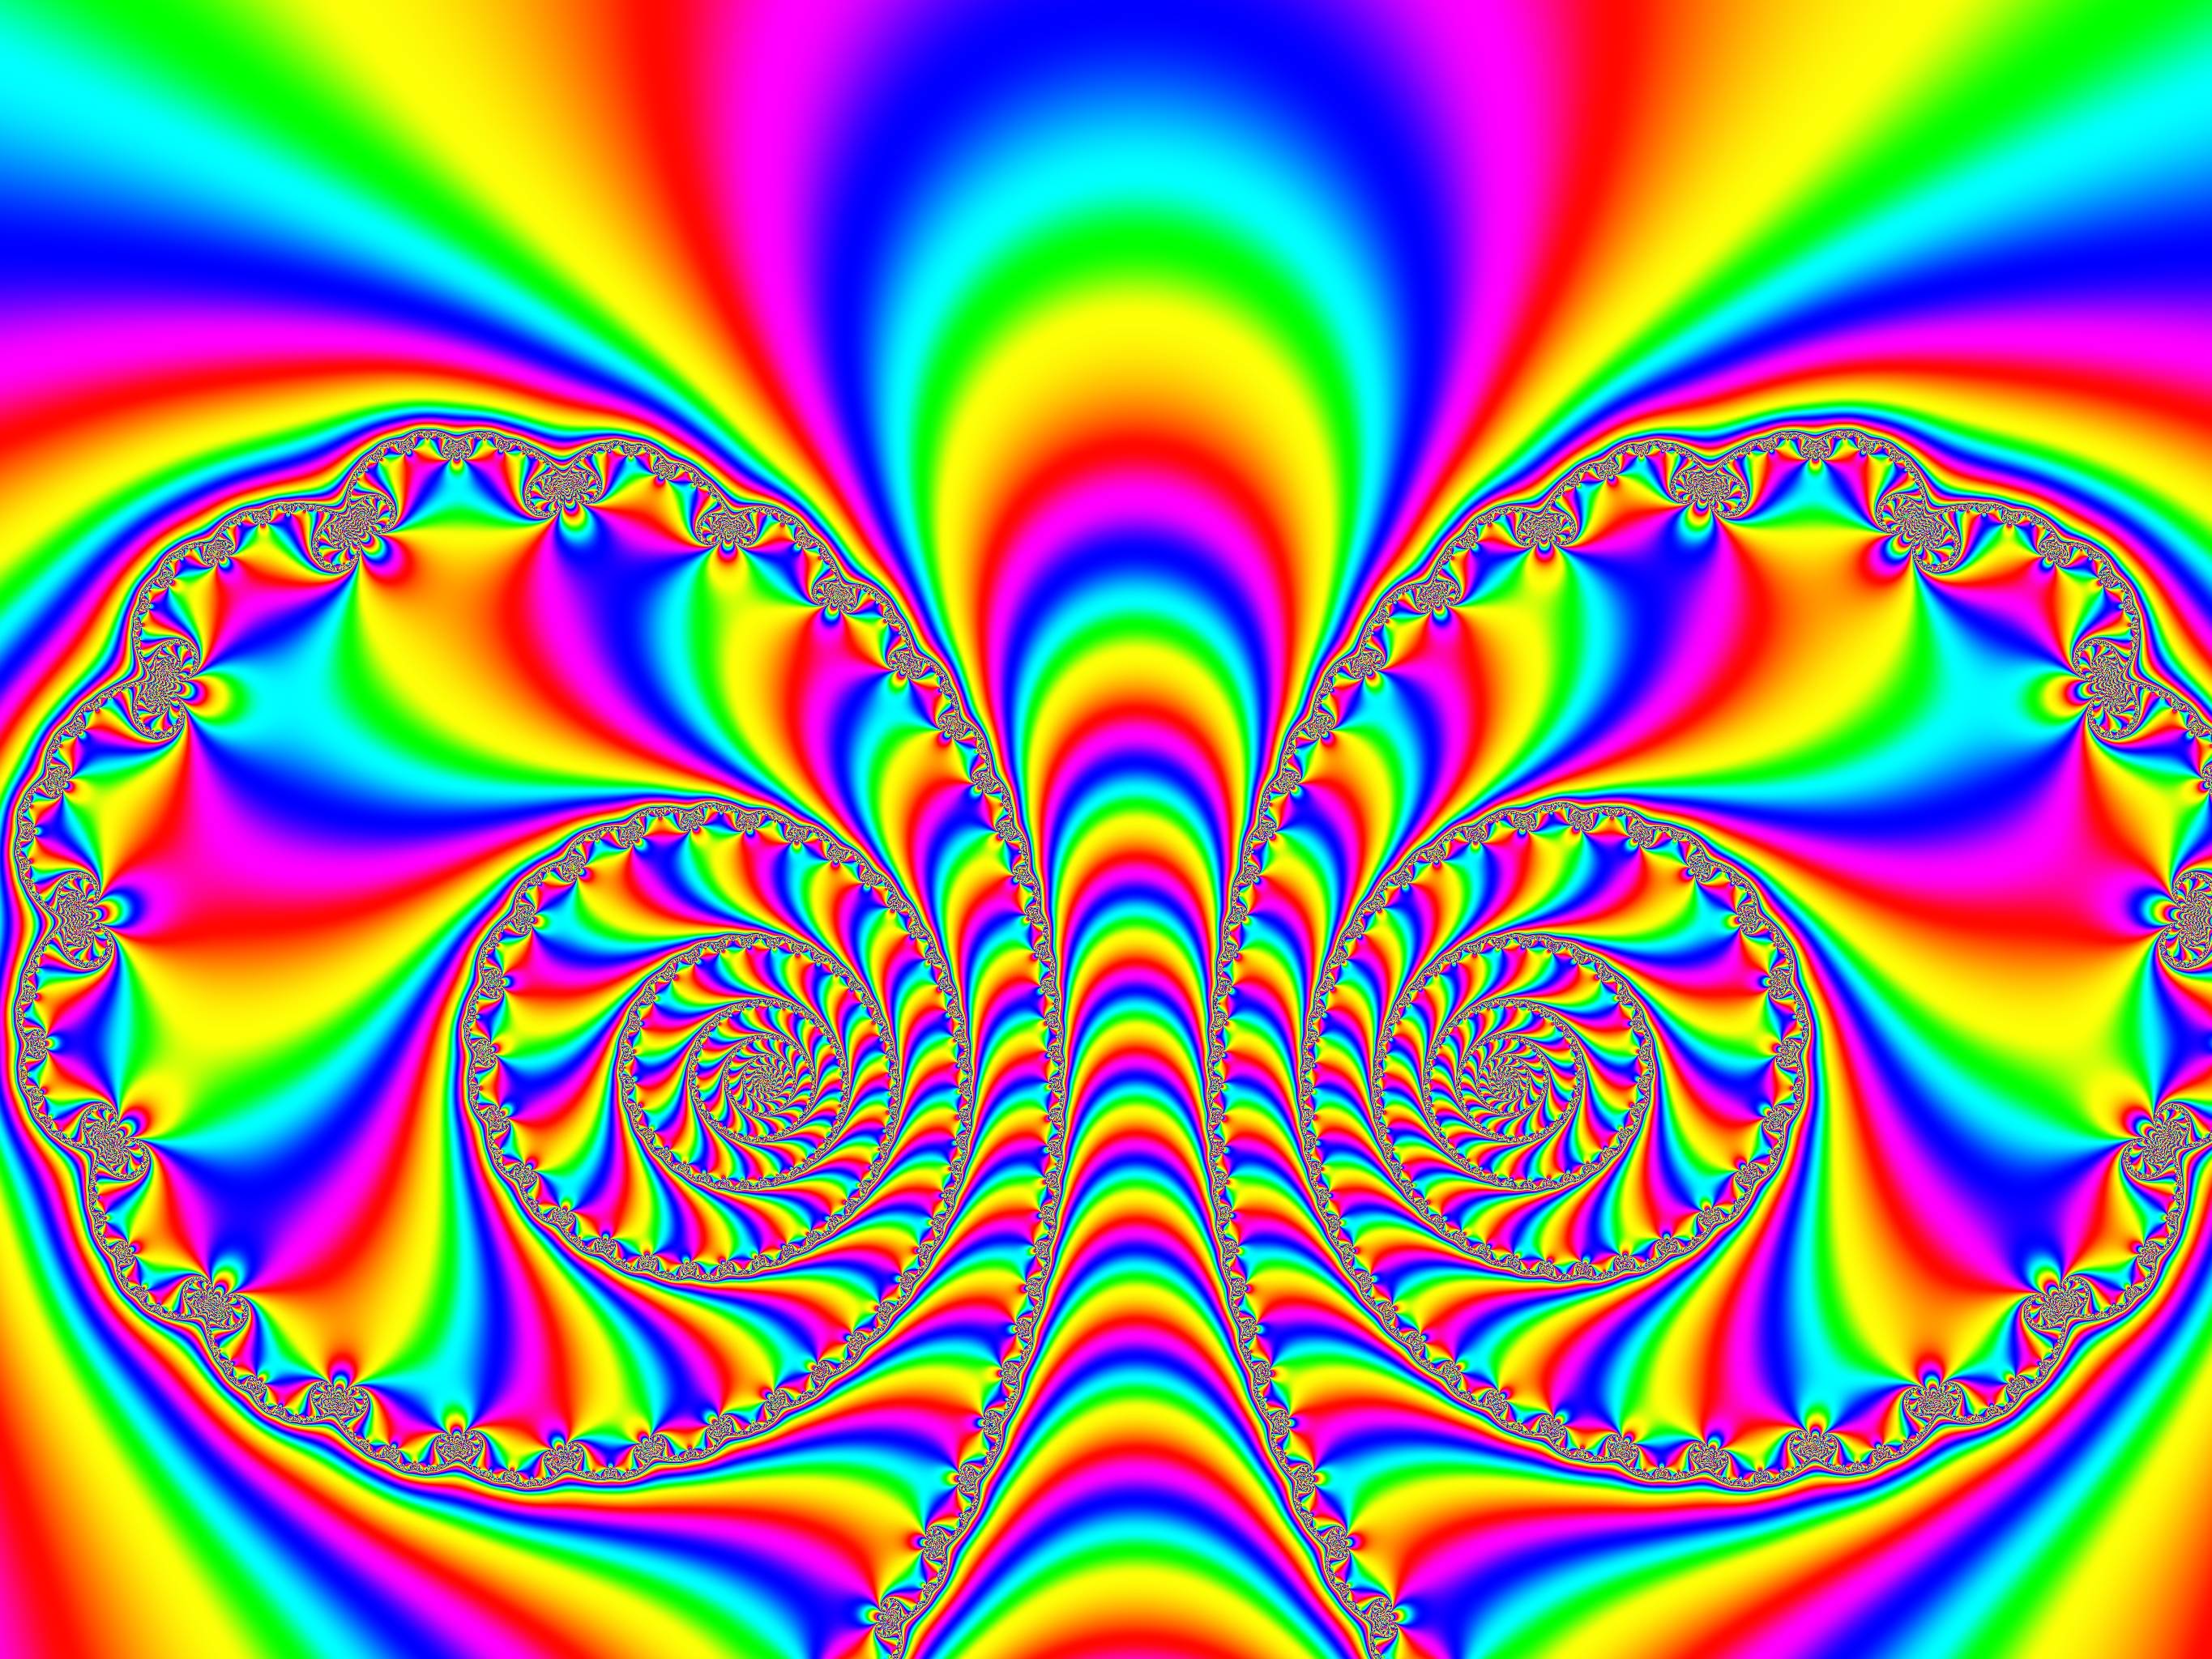 trippy backgrounds for twitter